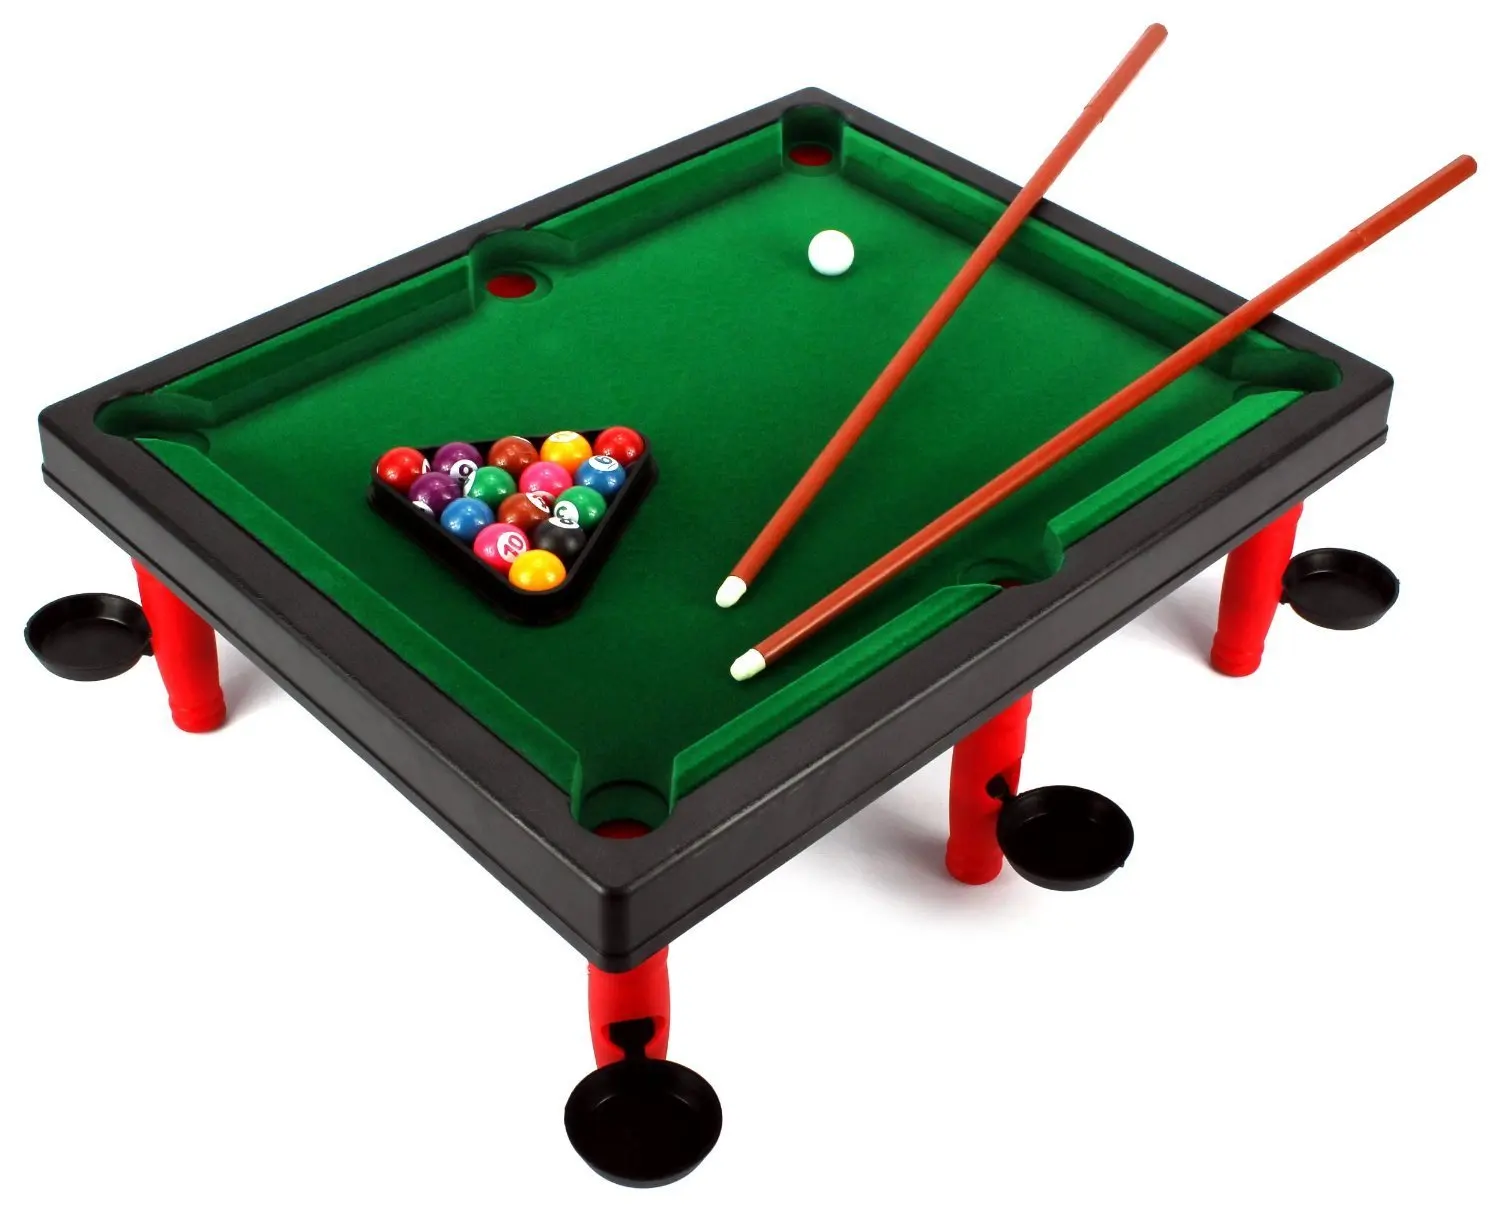 Remeehi Mini Billiards Tabletop Game Toy Pool Table with Cues Triangle and Balls